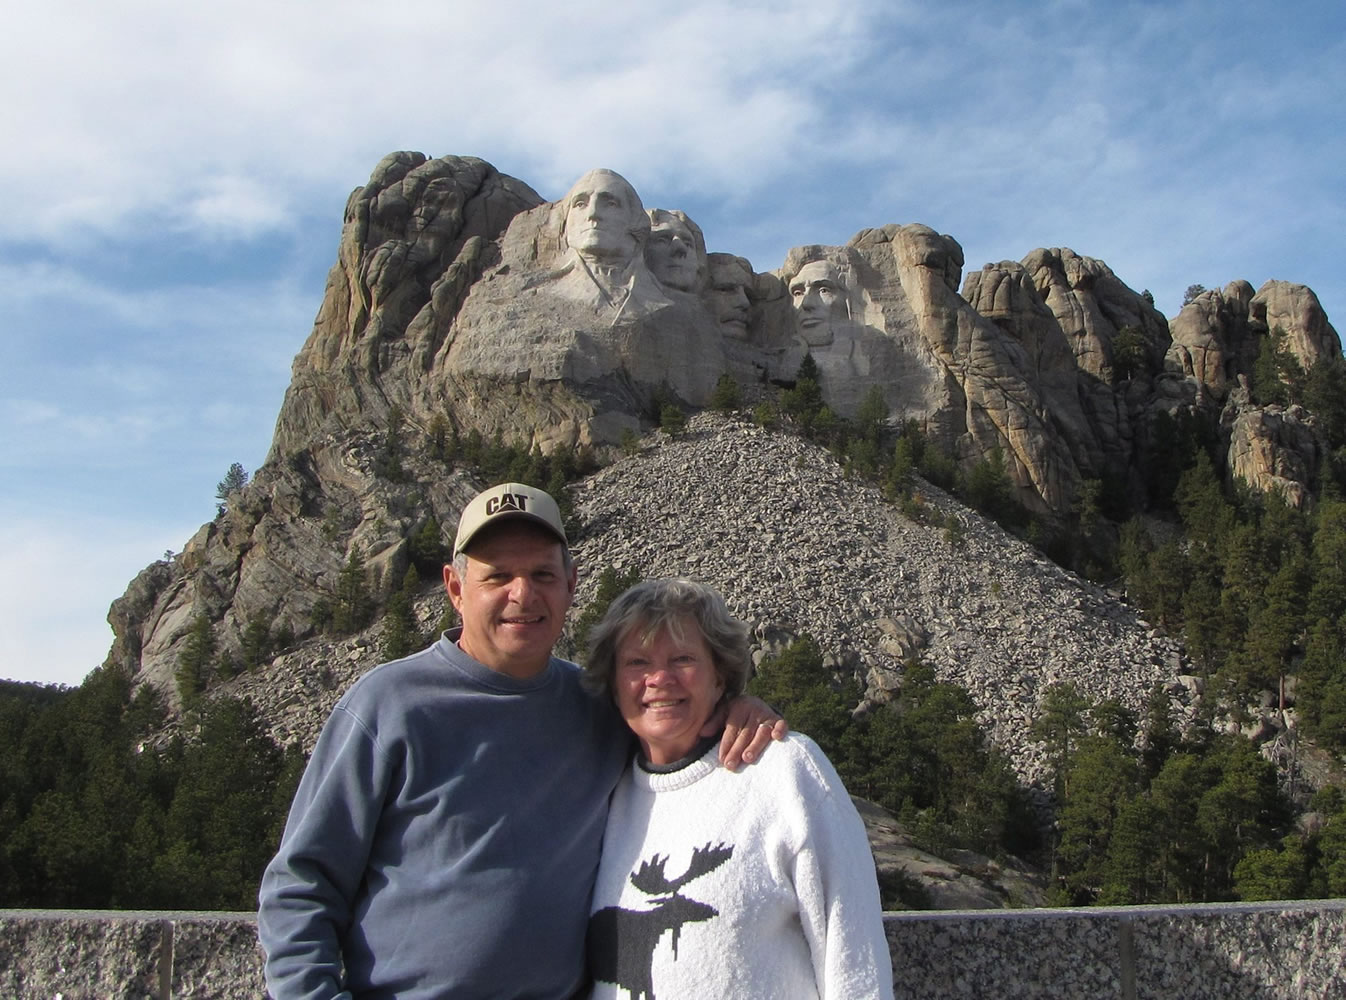 Mount Rushmore, S.D.: You can't believe how big it is!